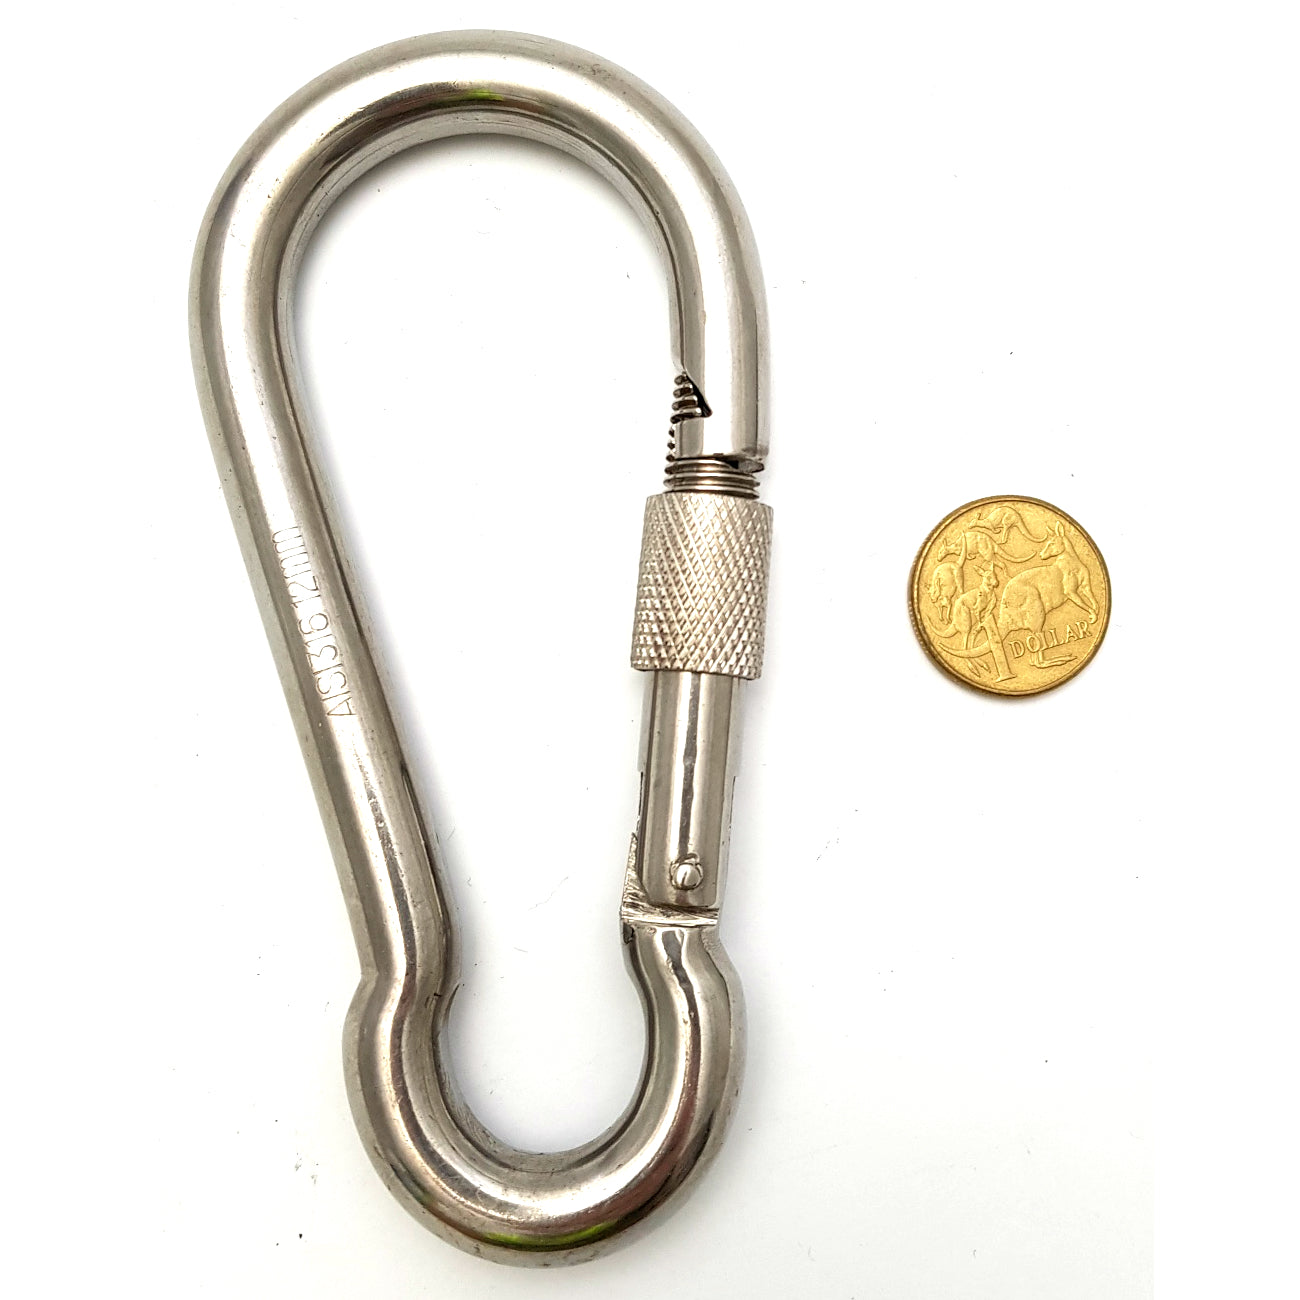 Stainless steel snap hook with locking screw gate (carabiner), size 12mm. Australia wide shipping. Shop chain.com.au